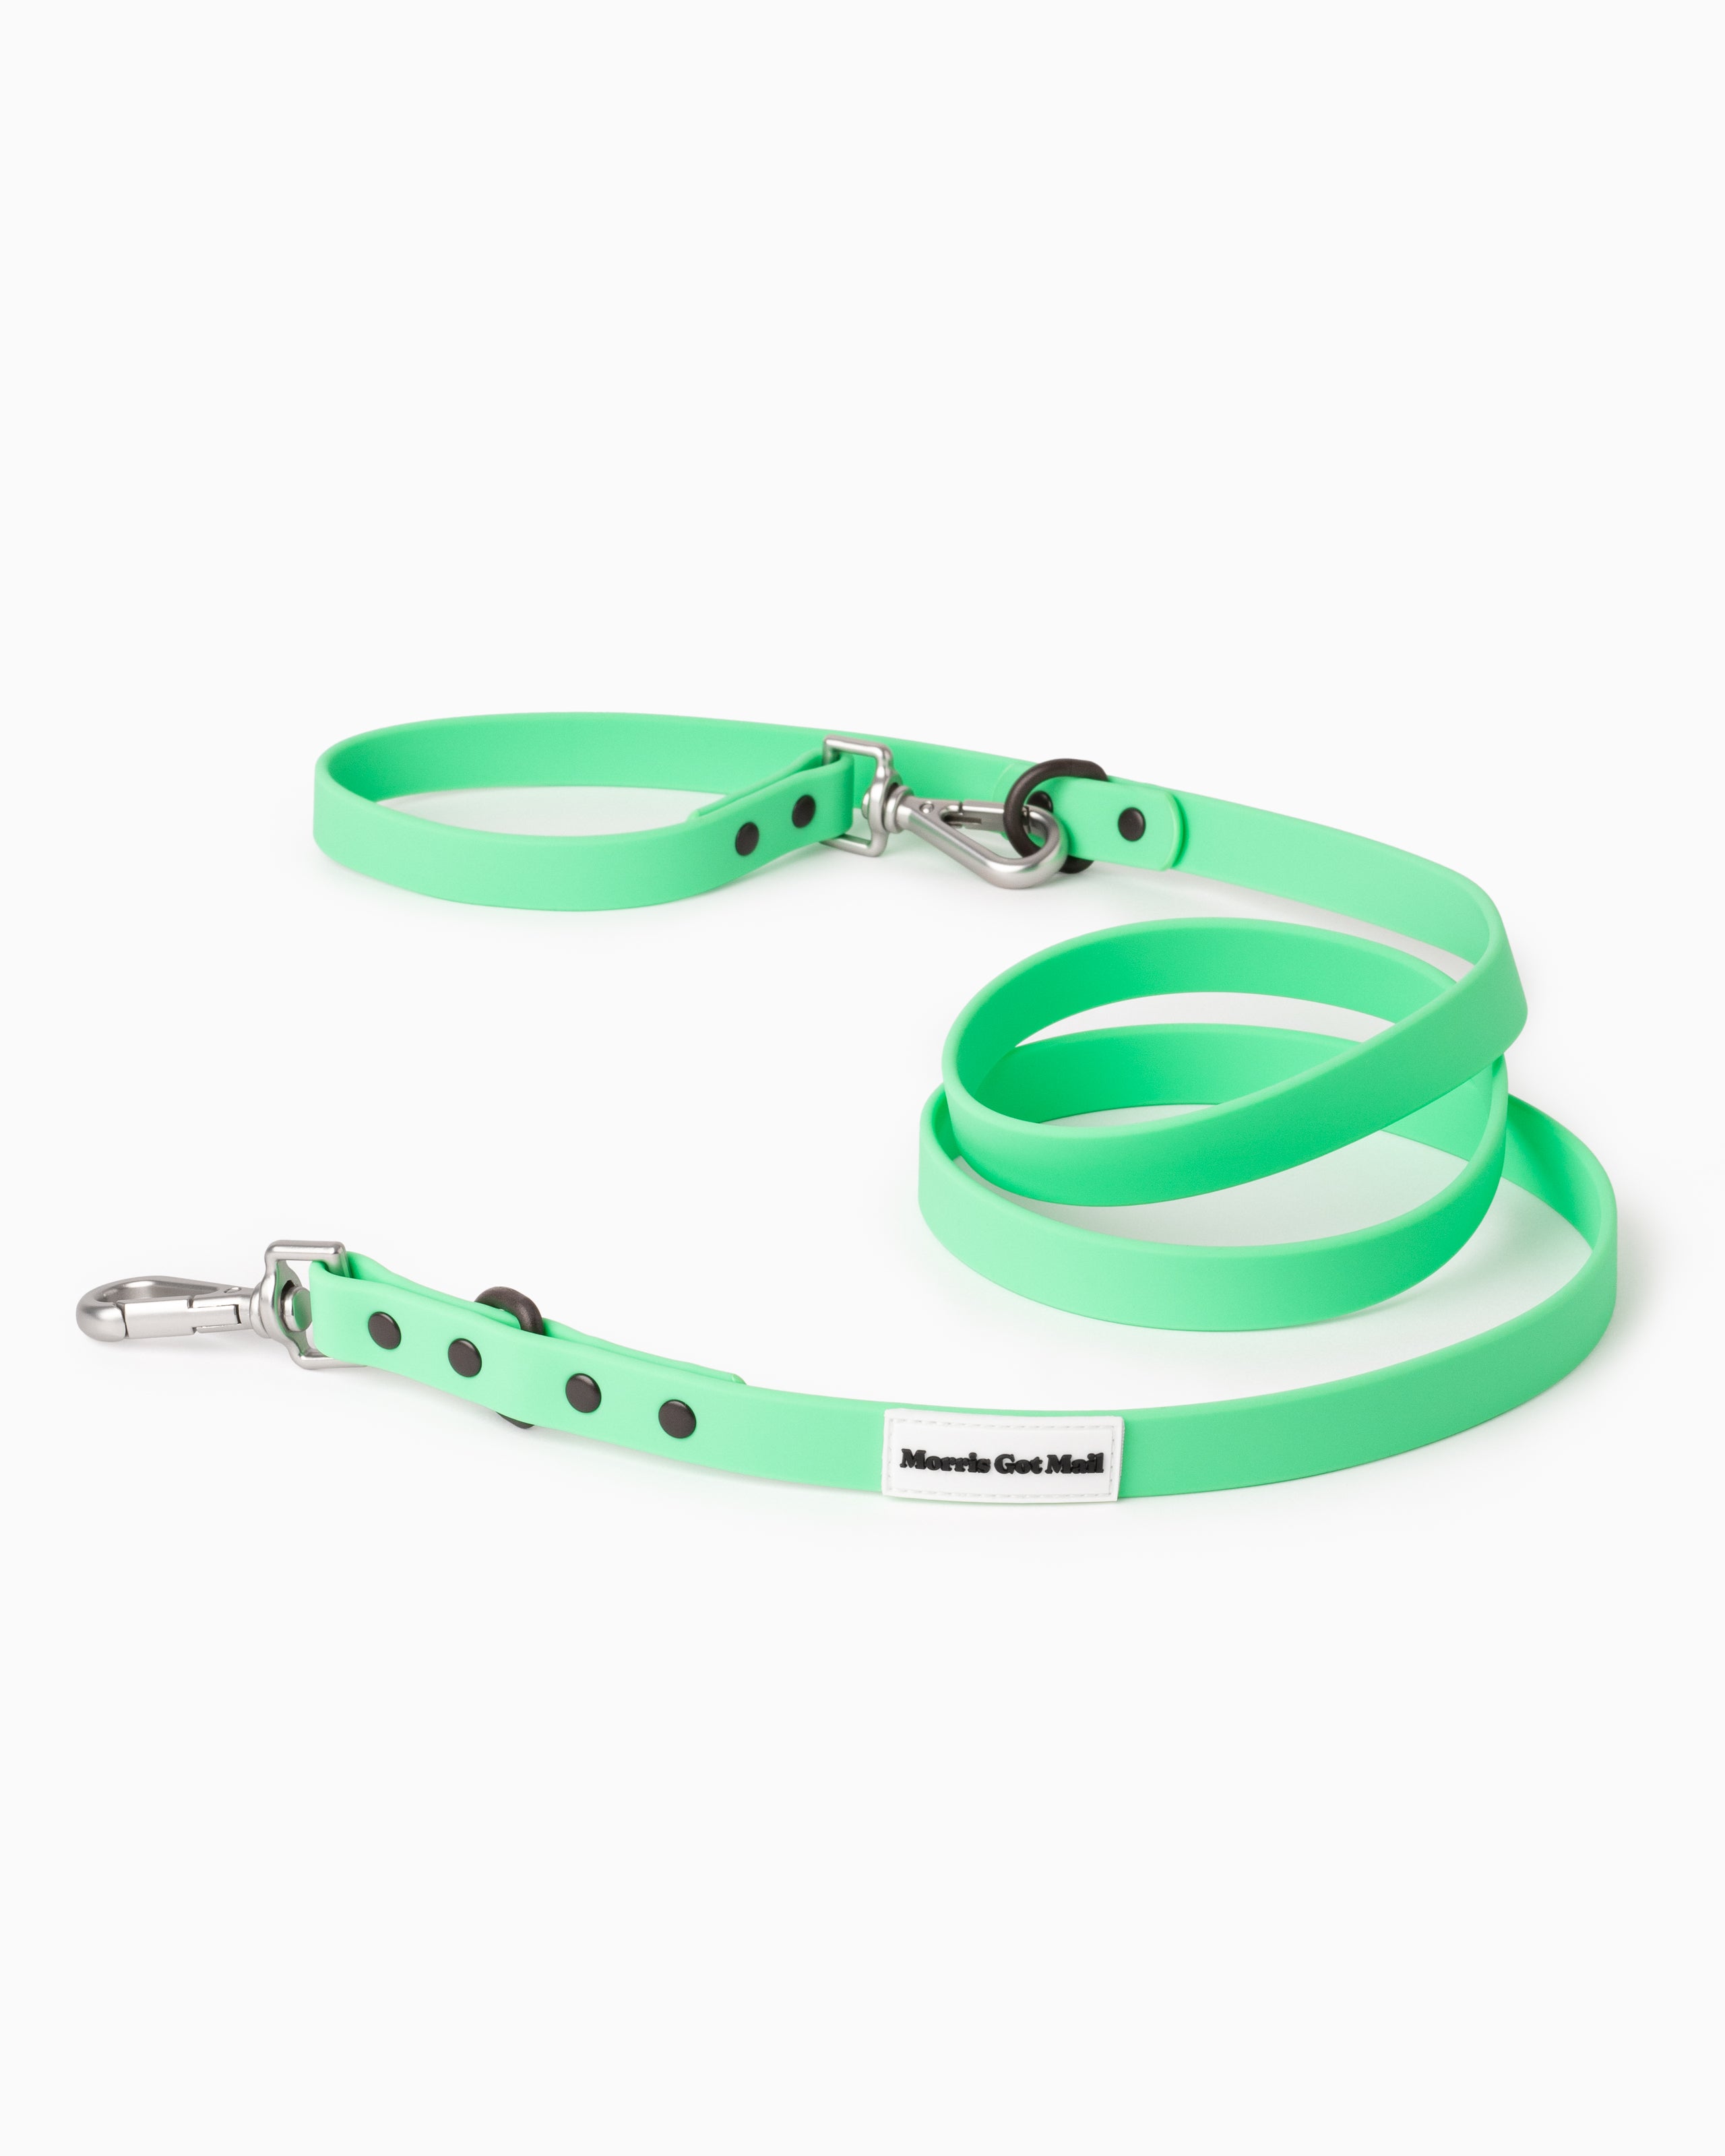 Spearmint green waterproof & odor resistant dog leash with a two tone colorblock design, two length options, a handle, carbon coated steel hardware, & zinc alloy attachment hooks.